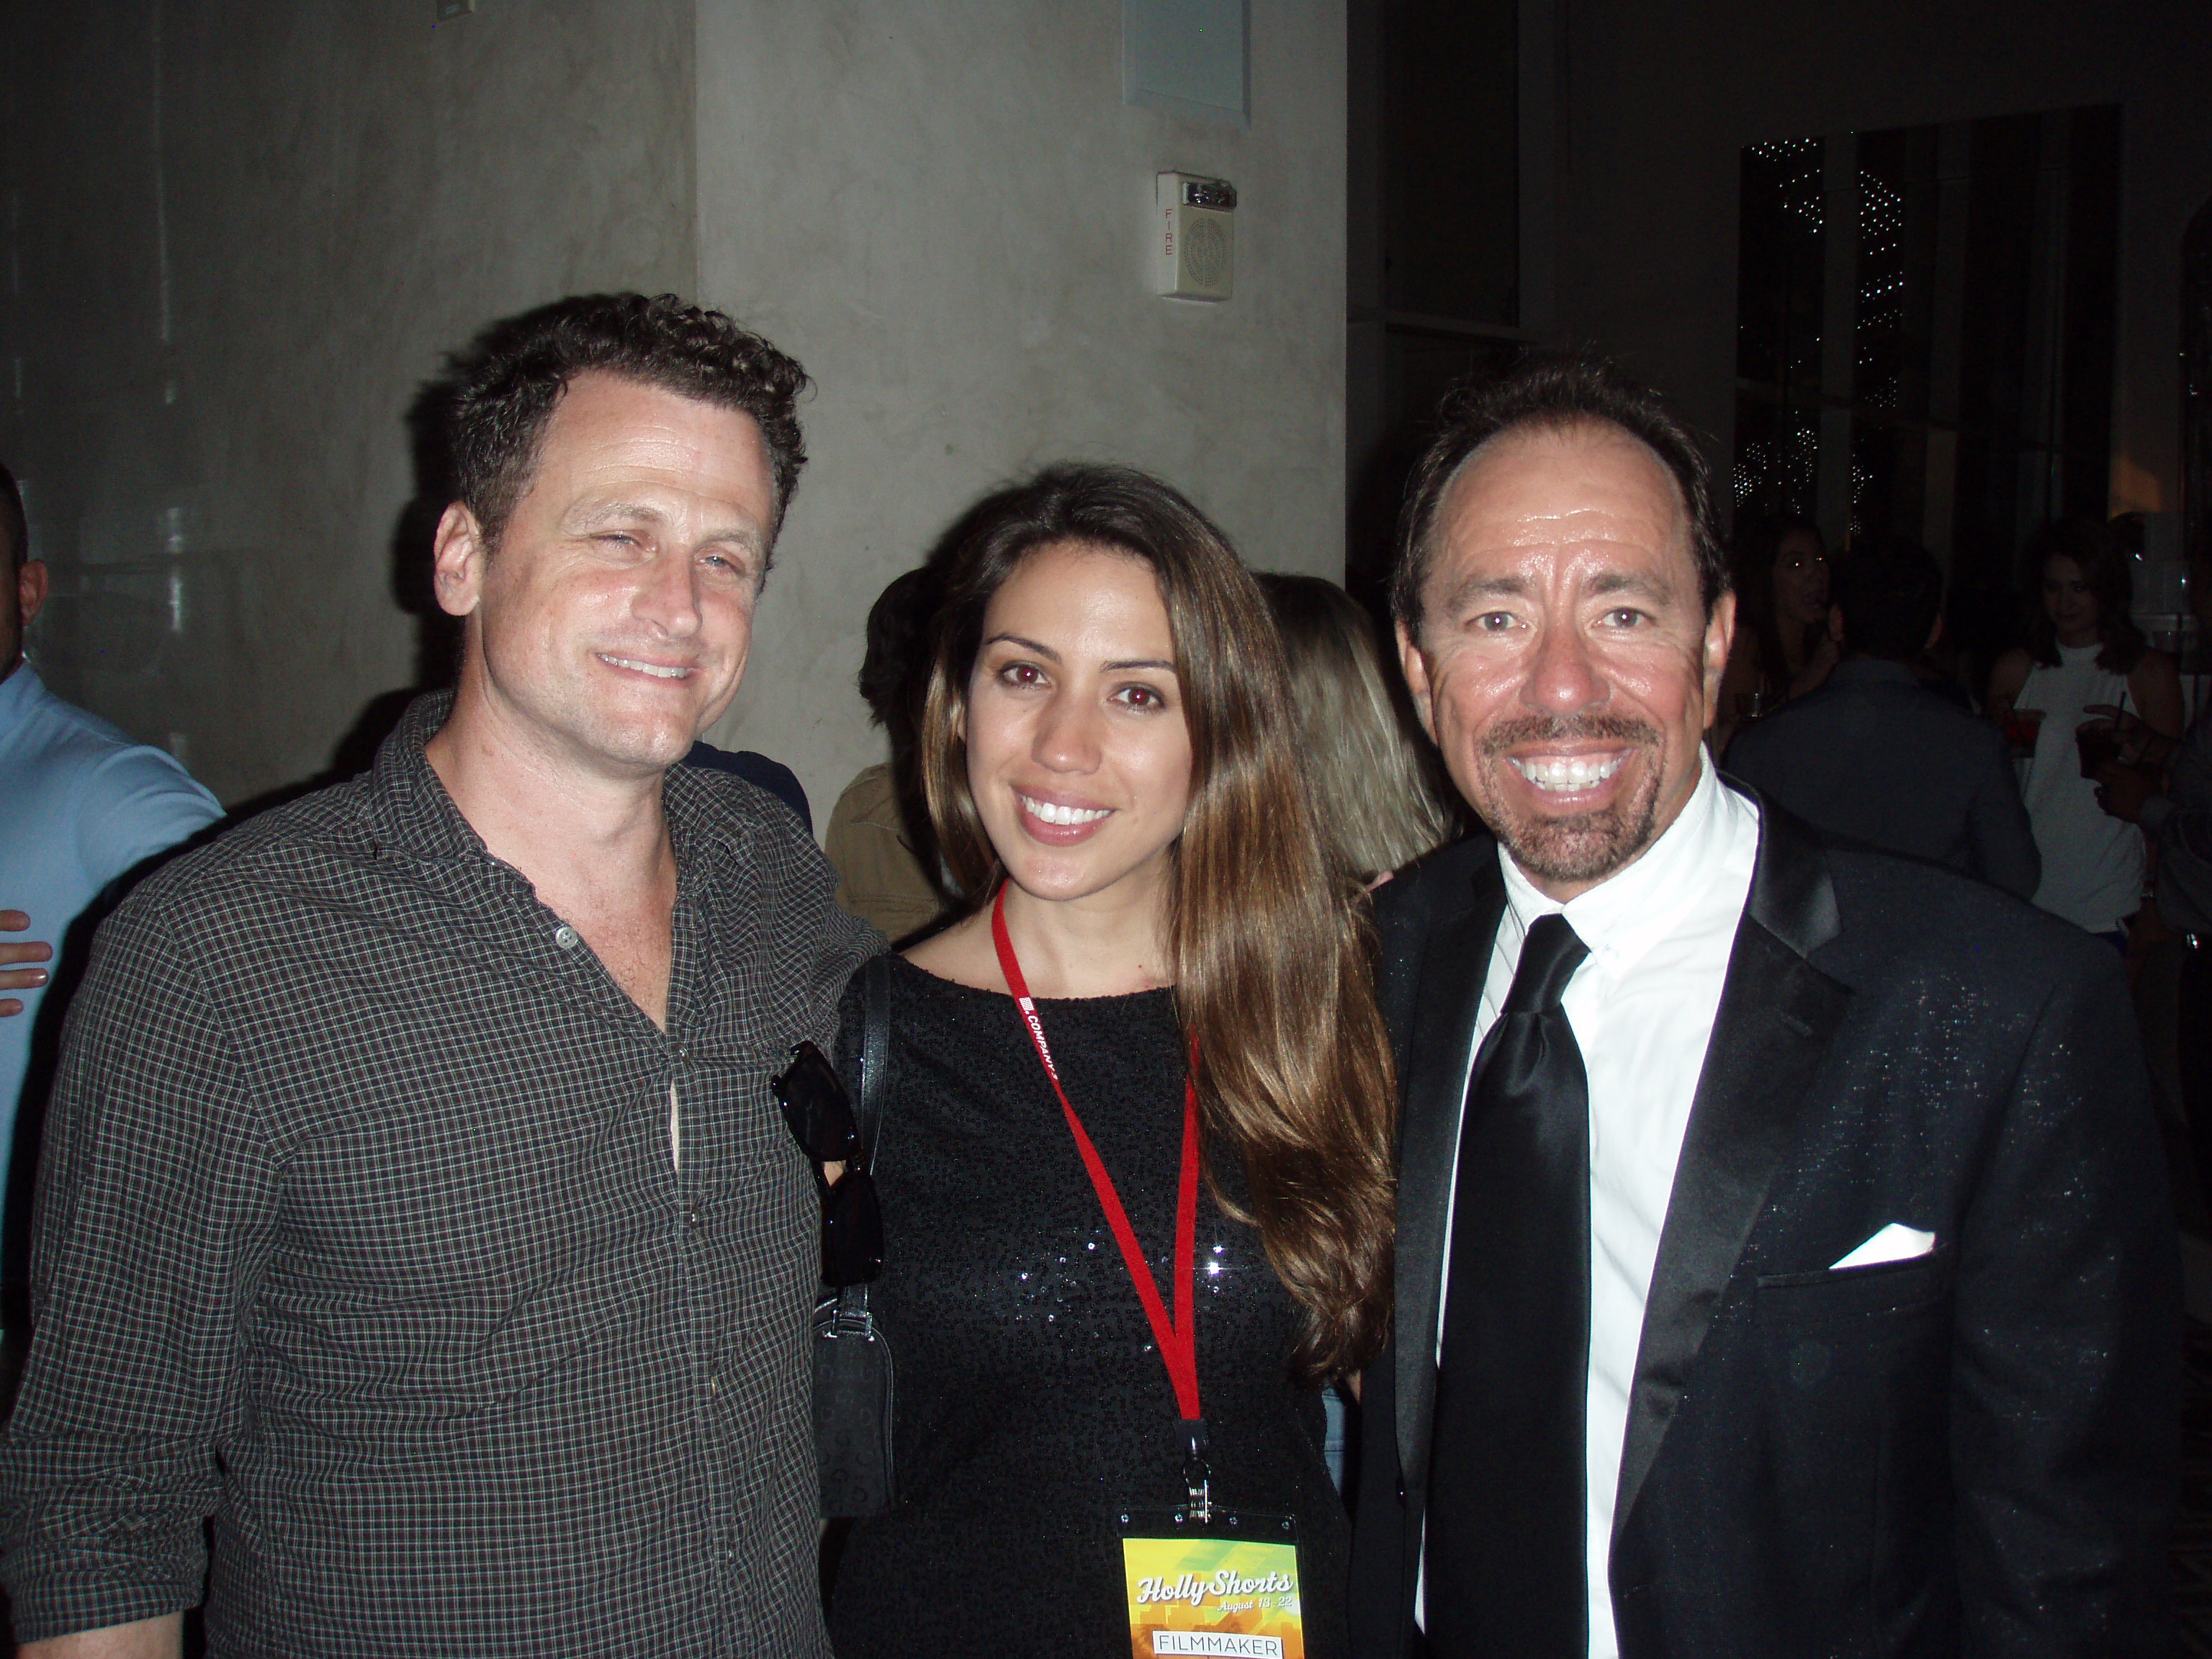 David Moscow, Grace Santos and Anthony Escobar at red carpet event for Odessa The Series